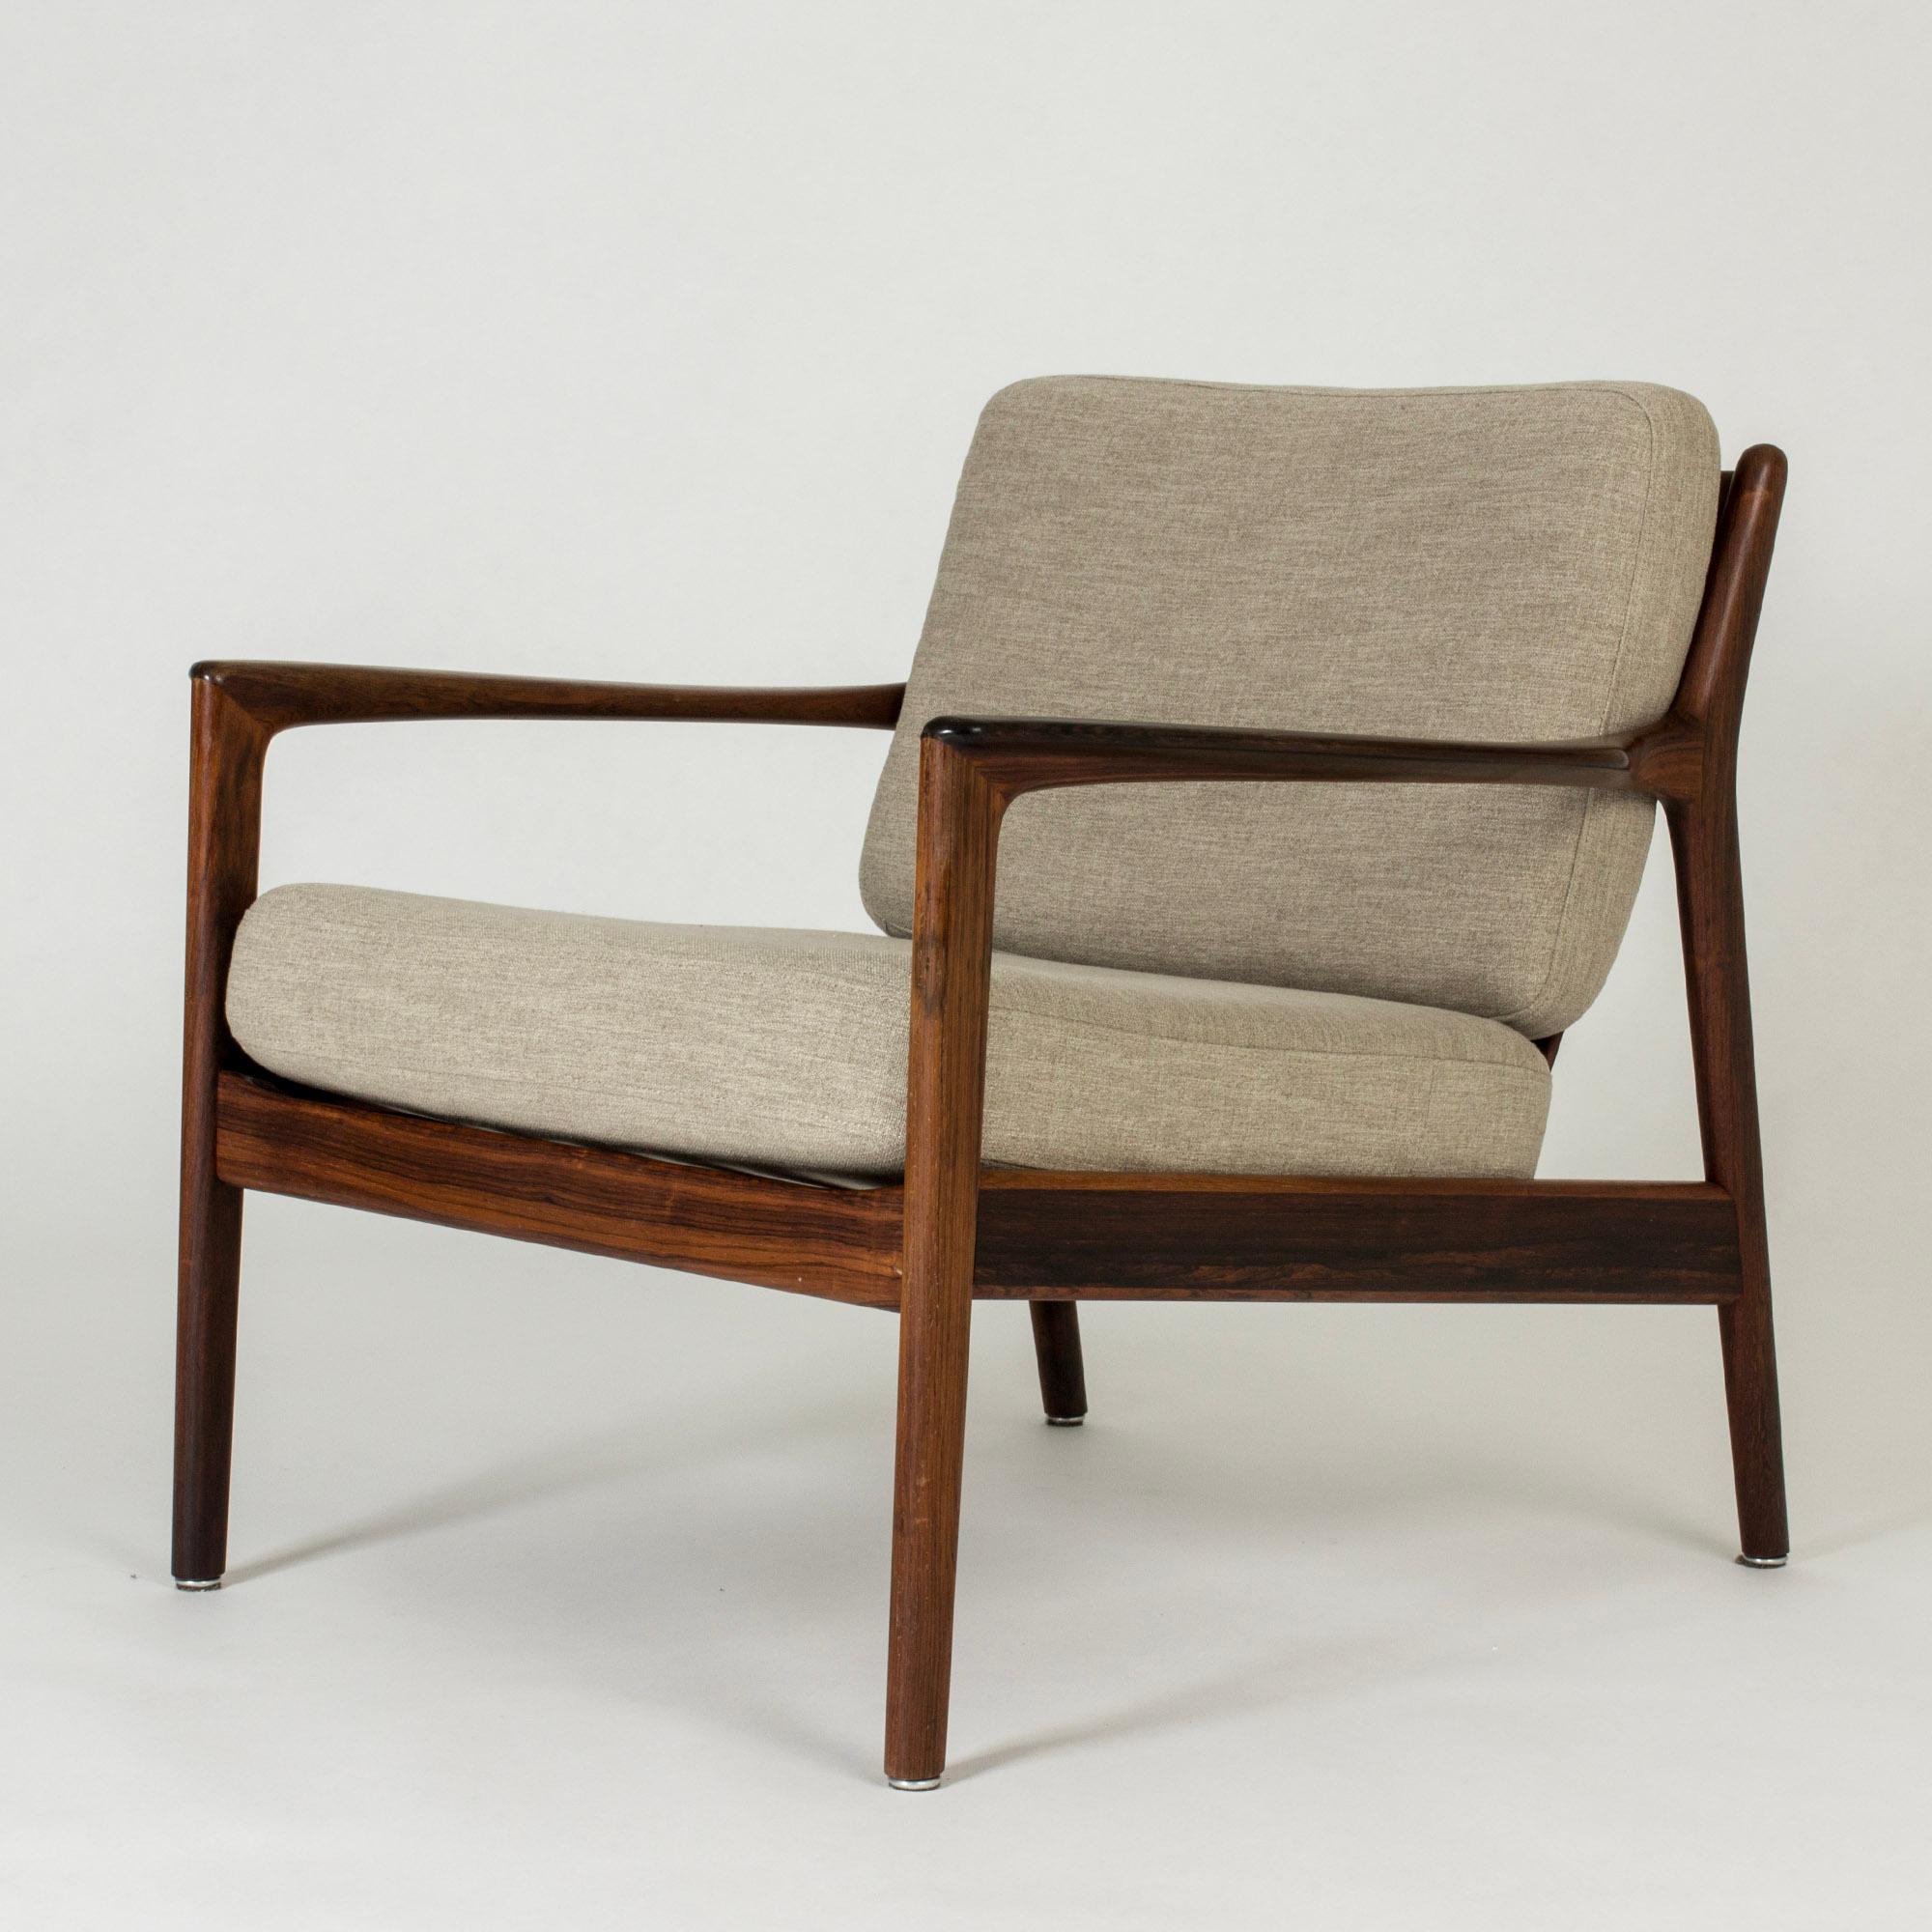 Elegant and comfortable “USA 75” lounge chair by Folke Ohlsson, with loose greige cushions. Rare rosewood version. Beautifully sculpted armrests and ribbing in the back.